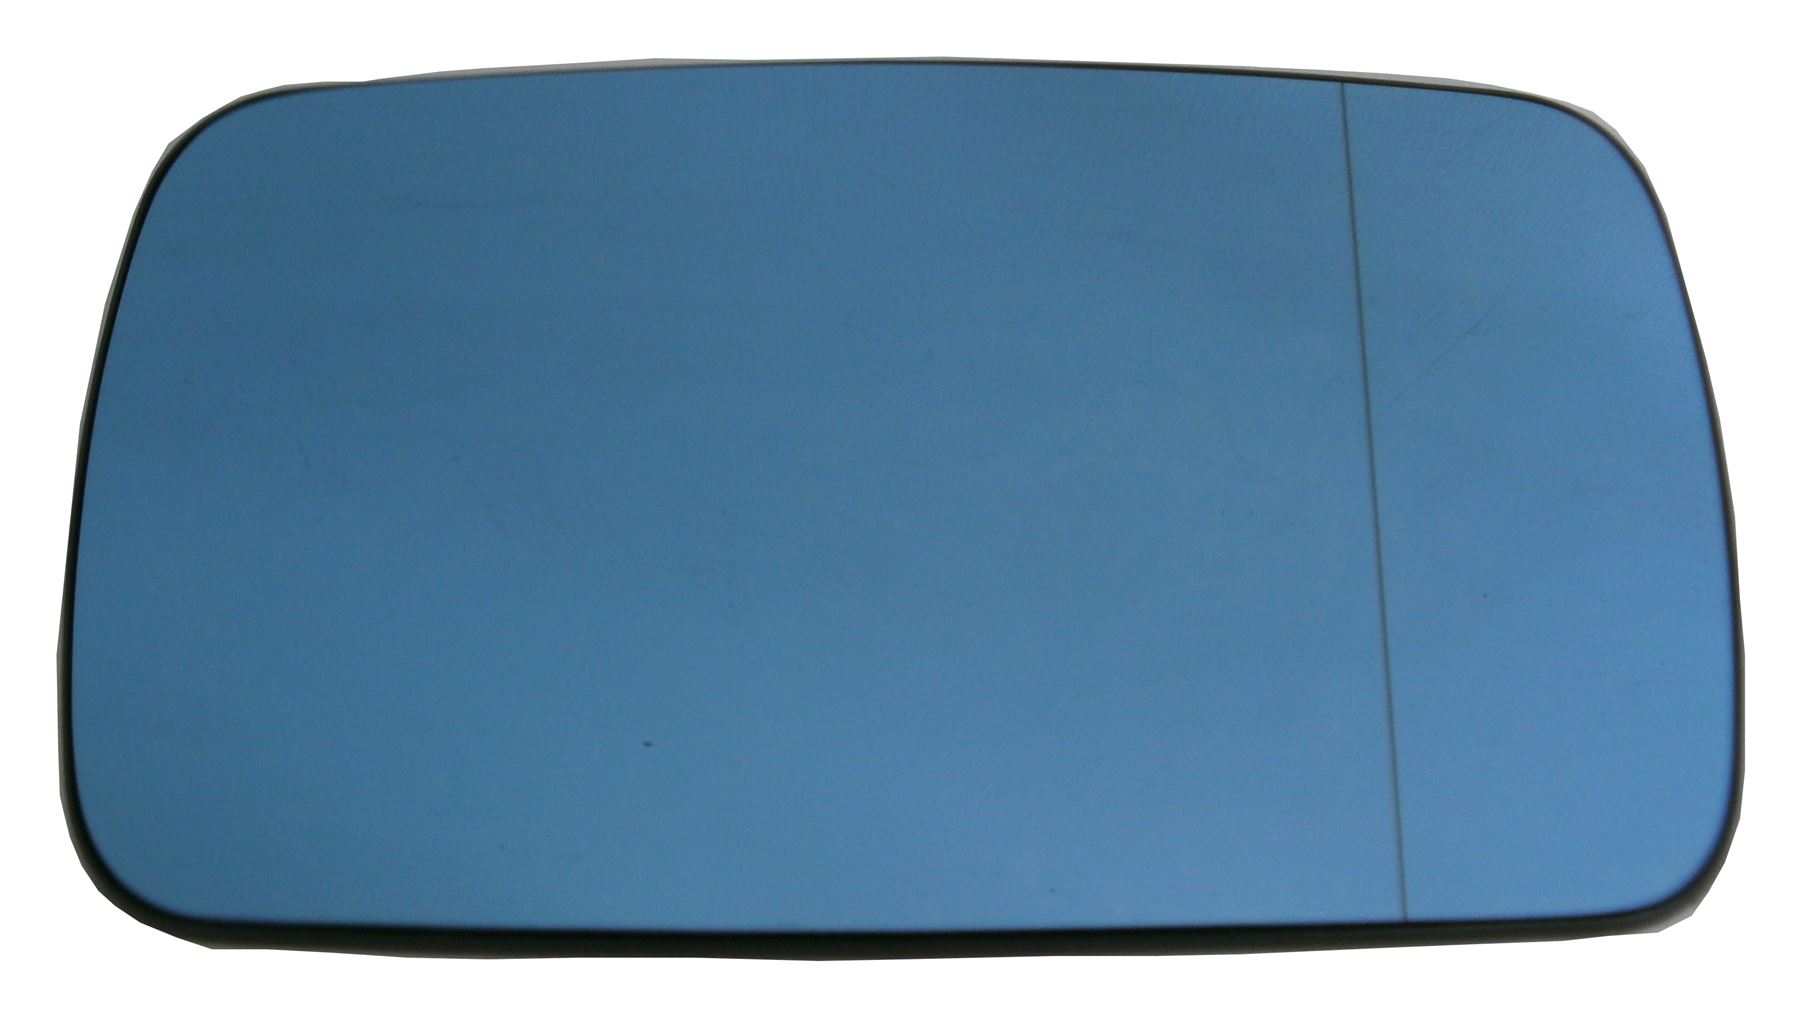 BMW 3 Series E36 4 & 5 Door 1991-2000 Heated Blue Tinted Mirror Glass Drivers Side O/S